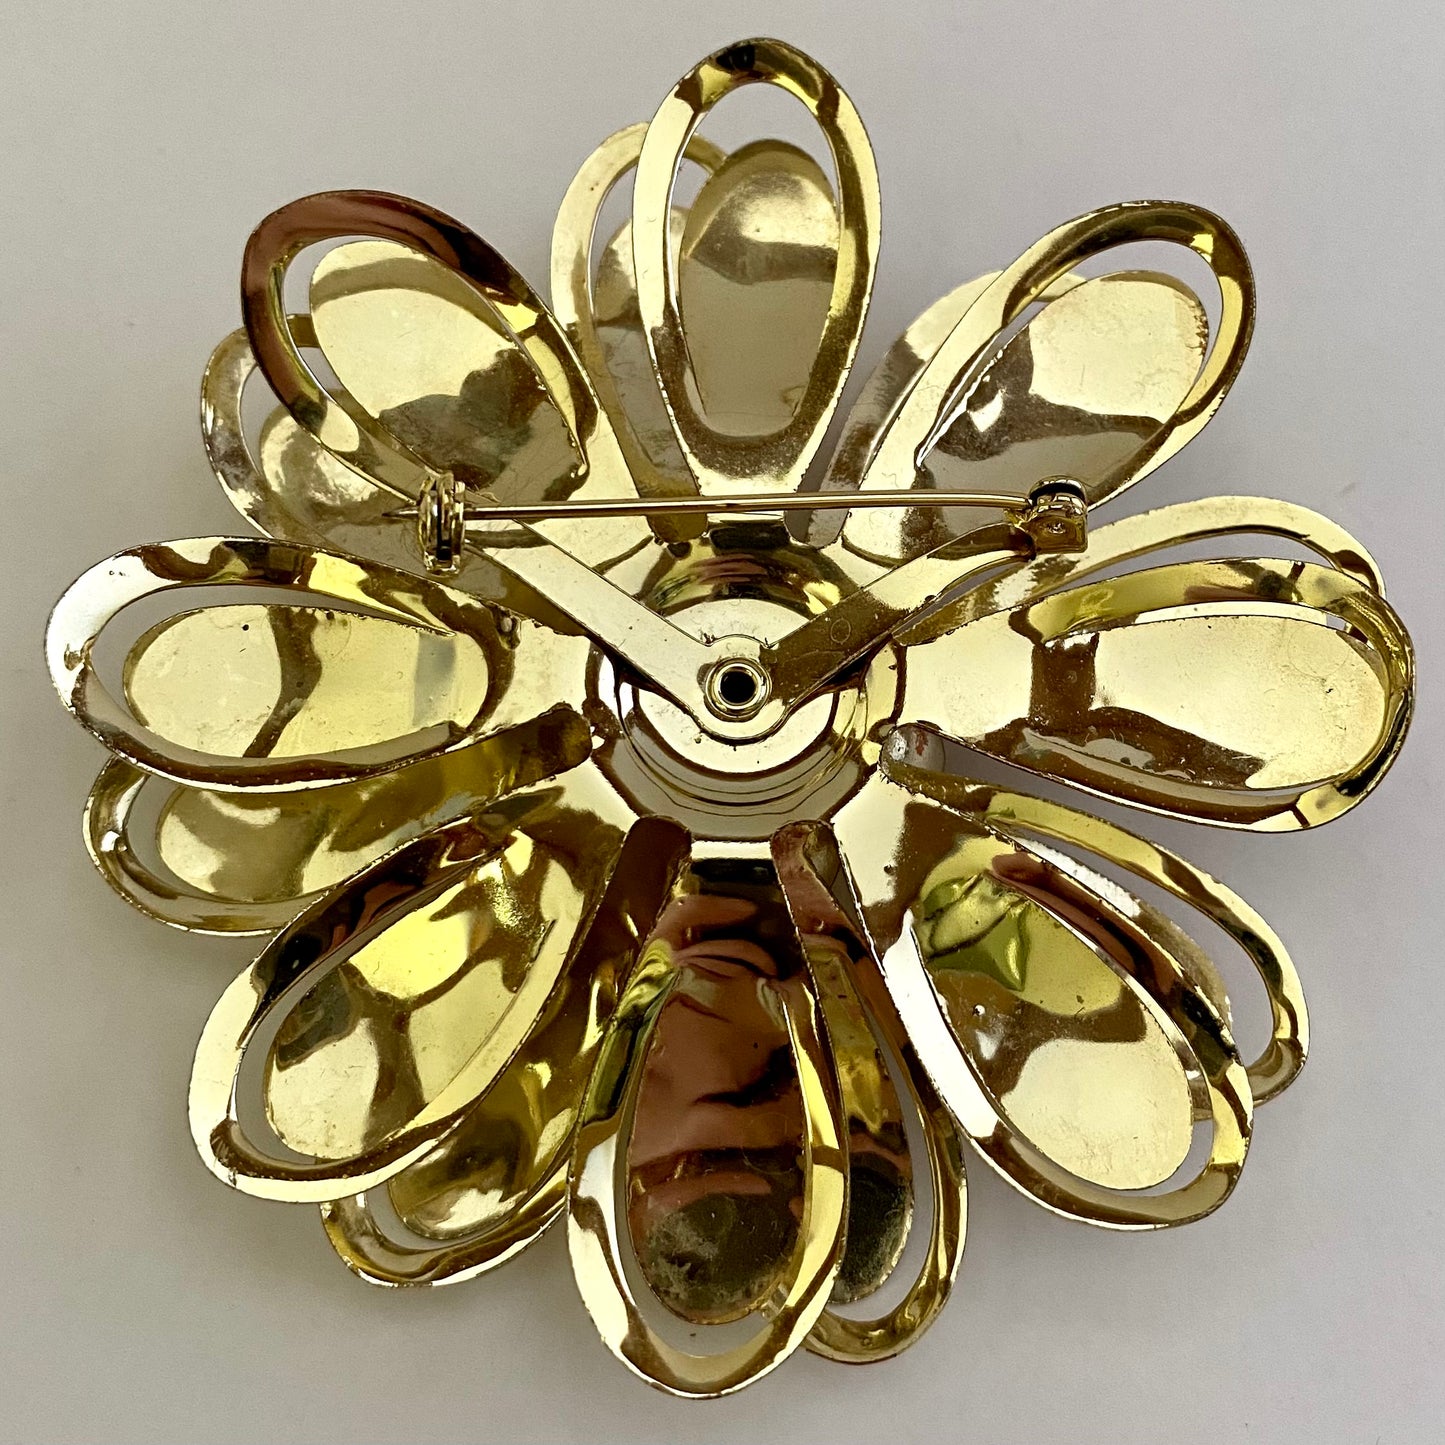 Late 60s/ Early 70s Large Gold-Tone Flower Brooch